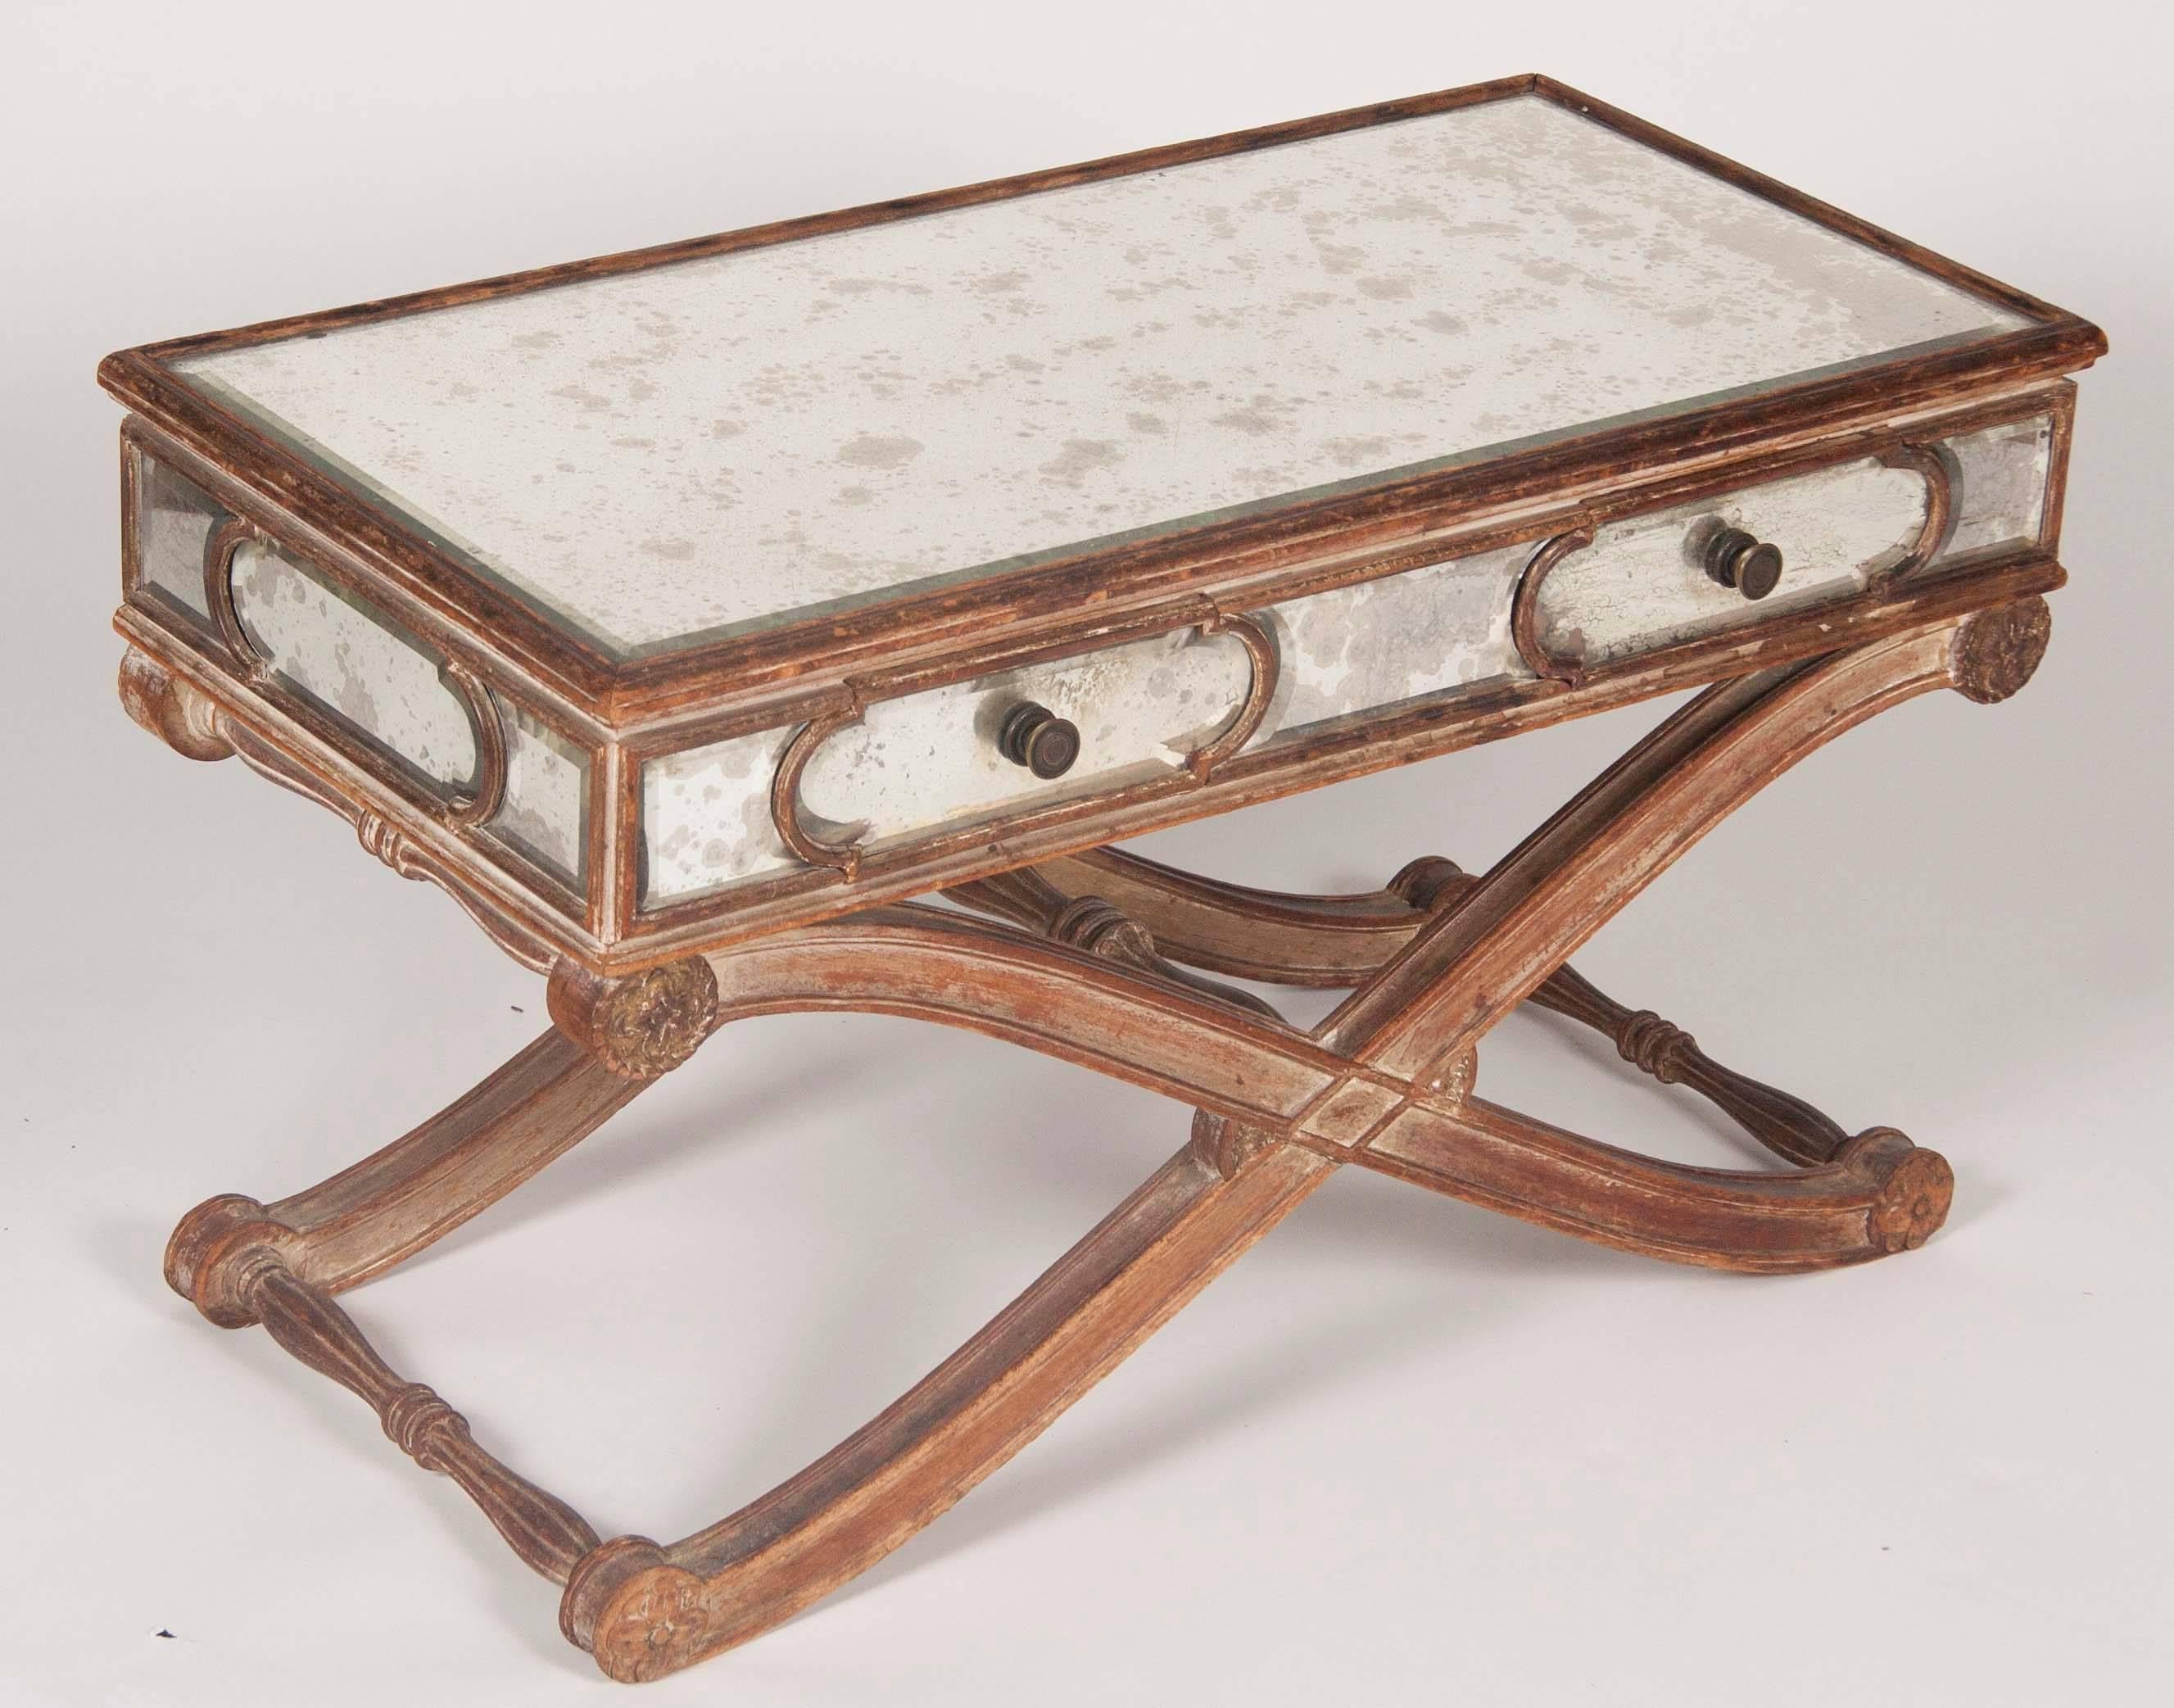 Hollywood Regency Italian Mid-20th Century Cerused Wood Mirrored Coffee Table with X-form Base For Sale